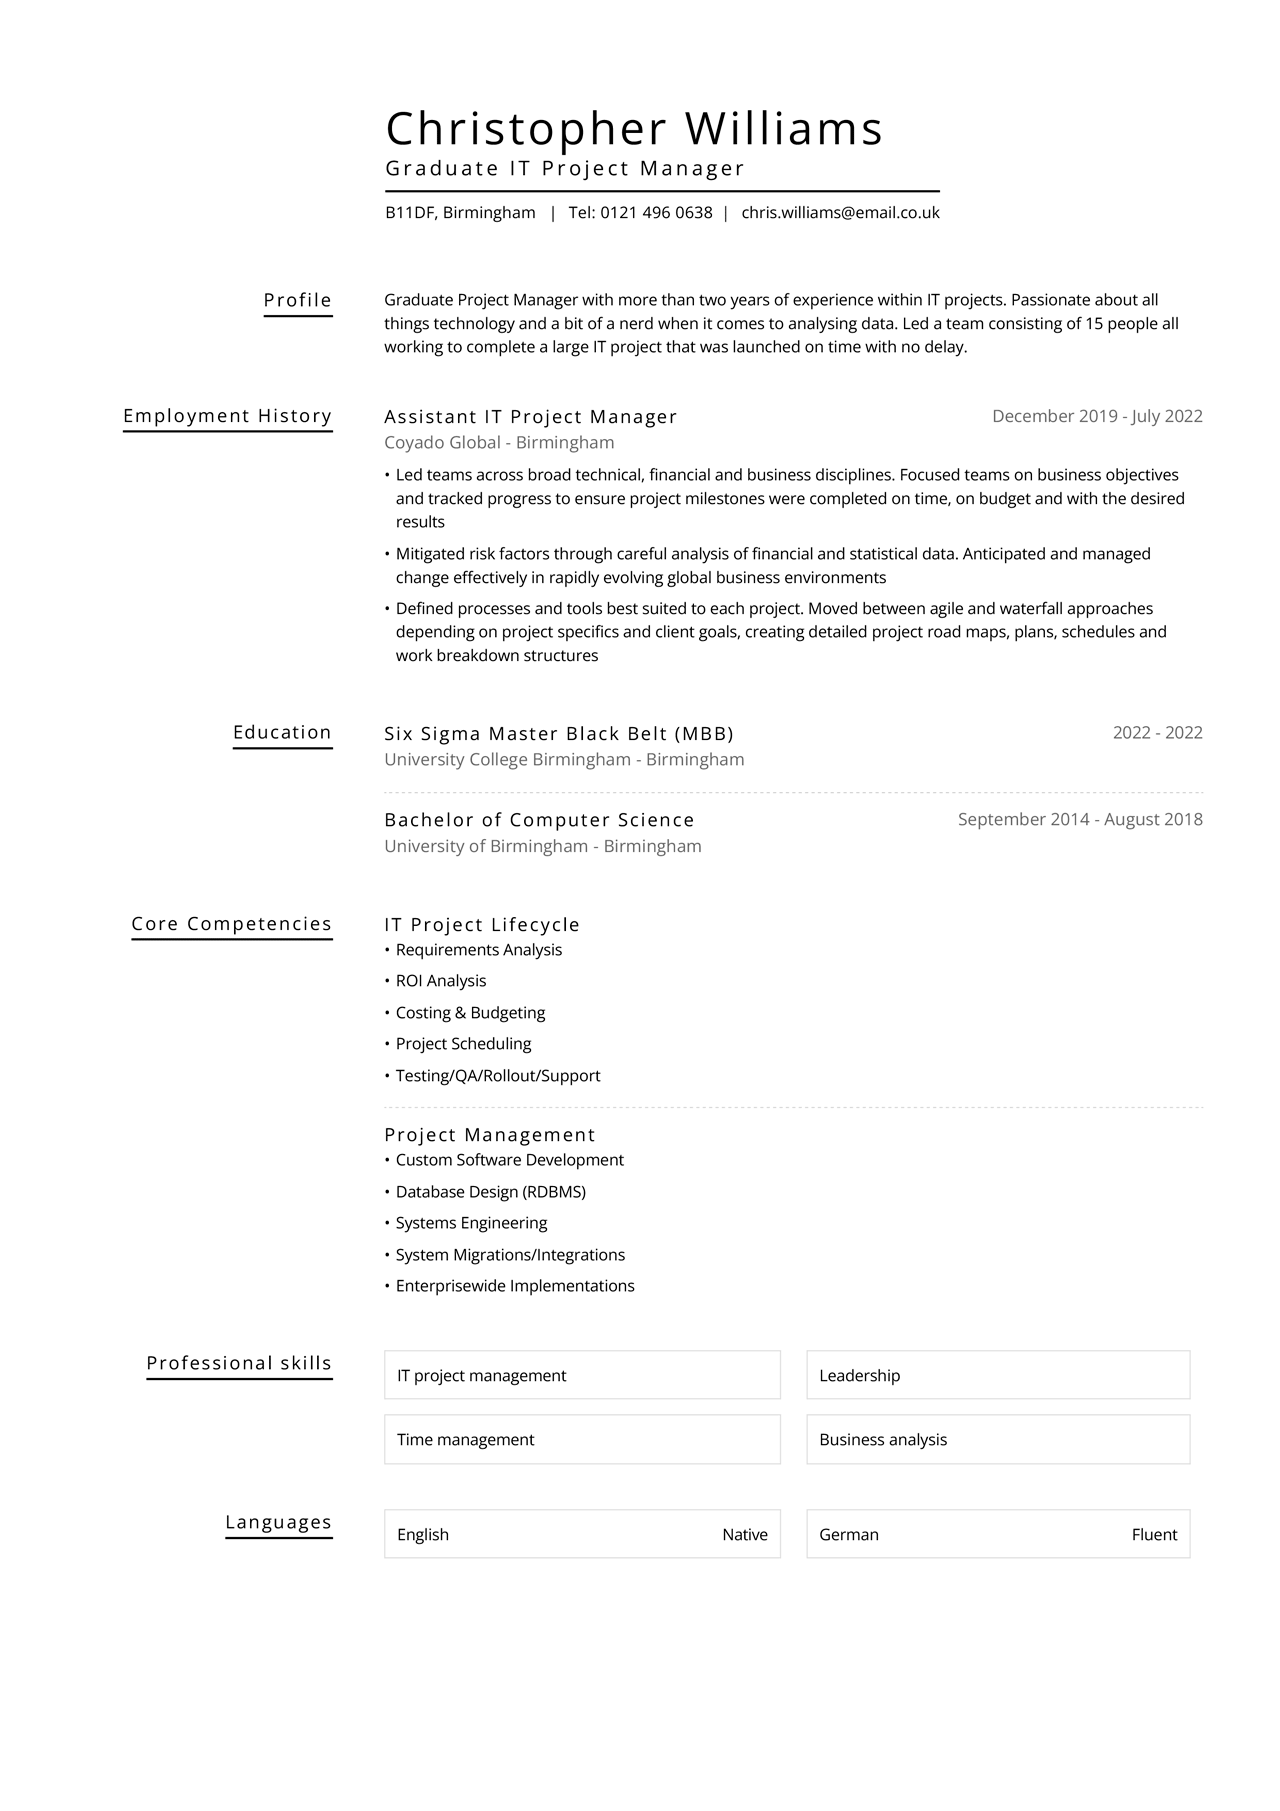 Example of a Project Manager CV